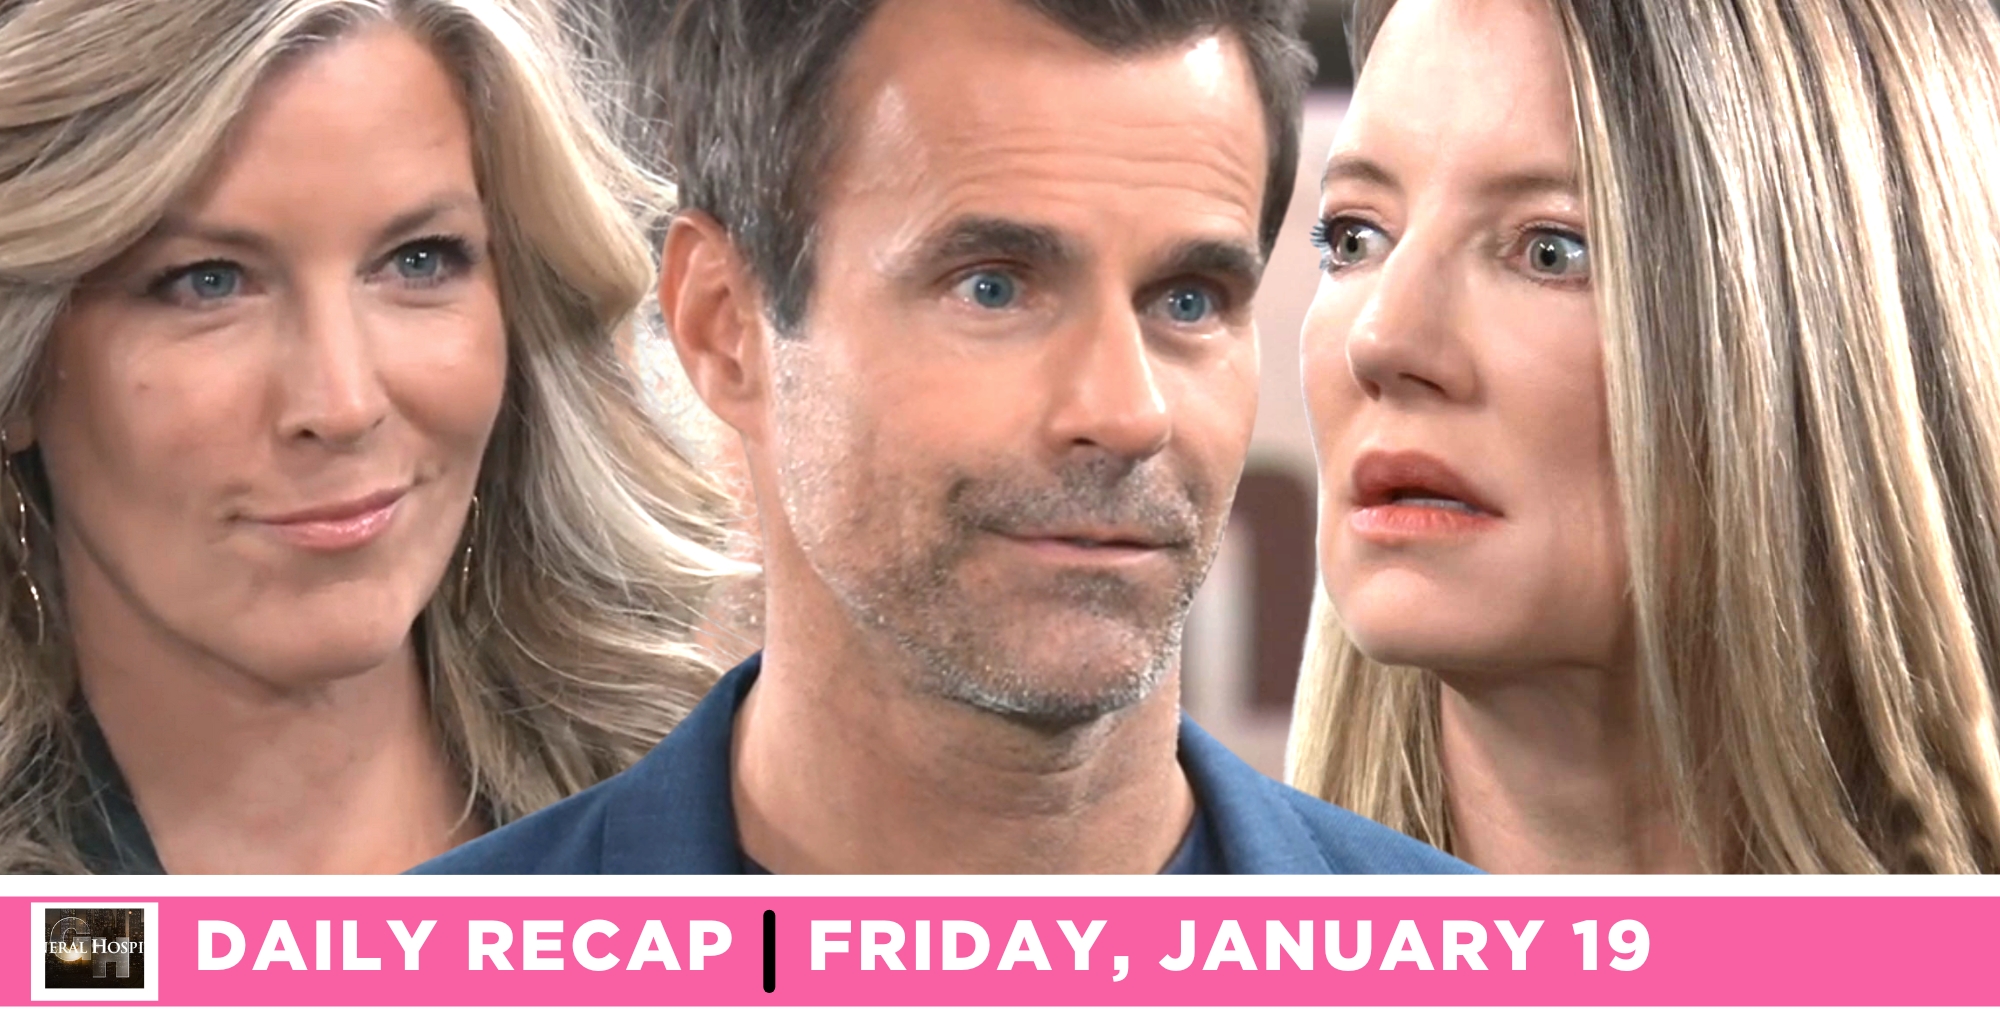 drew cain fired nina reeves corinthos and hired carly spencer on general hospital recap for friday, january 19, 2023.